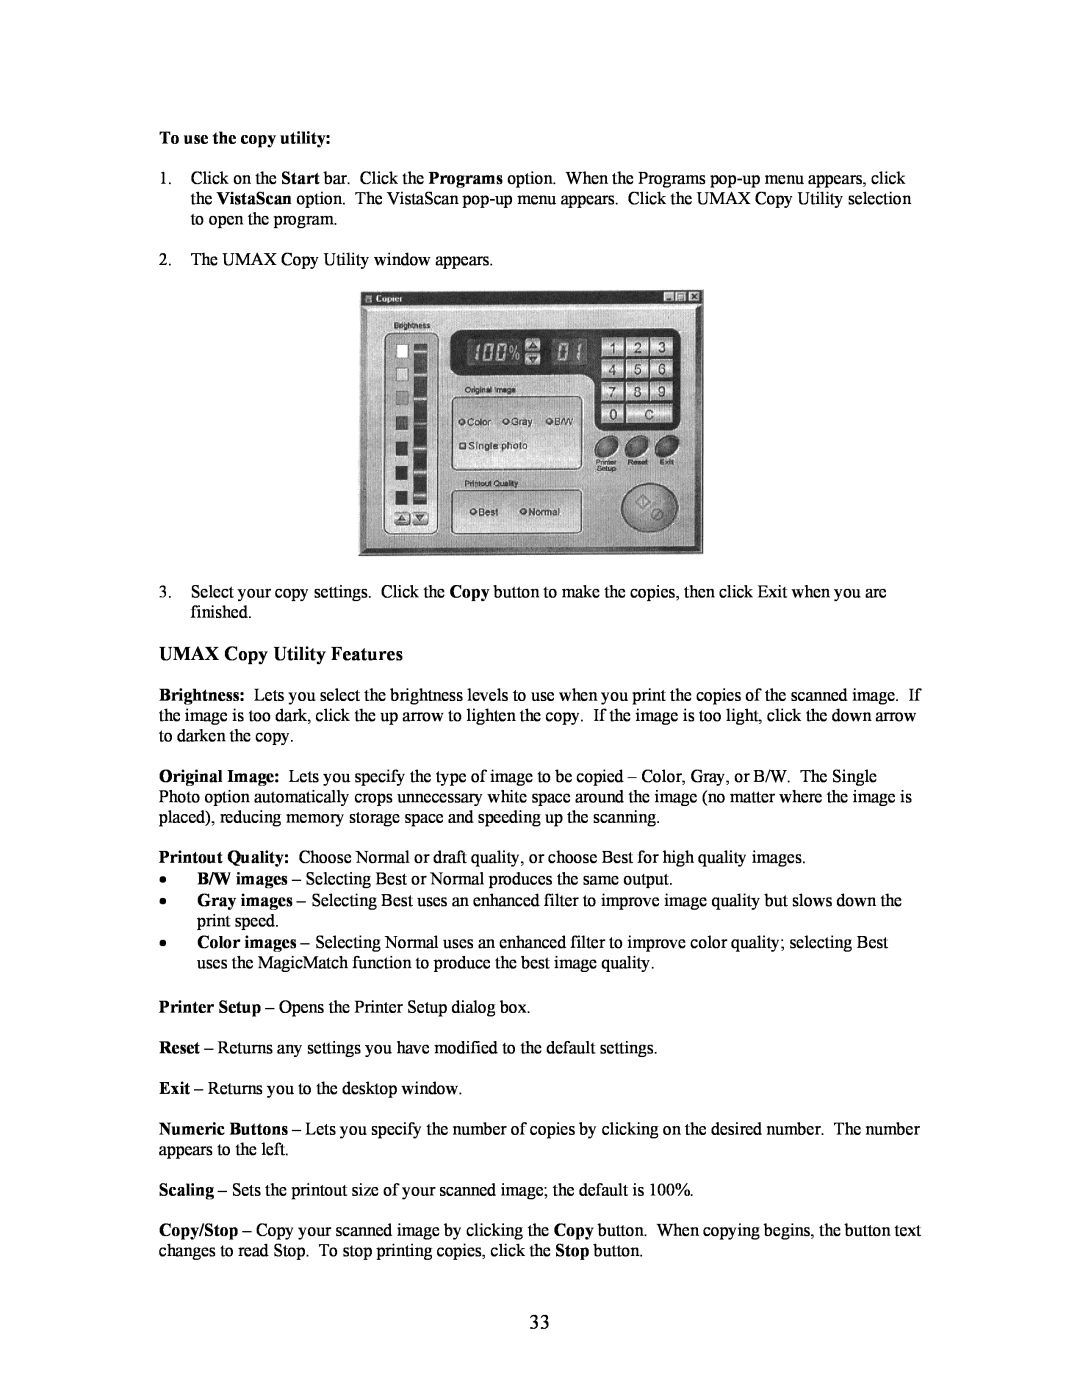 UMAX Technologies 3450, Astra 3400 owner manual UMAX Copy Utility Features, To use the copy utility 